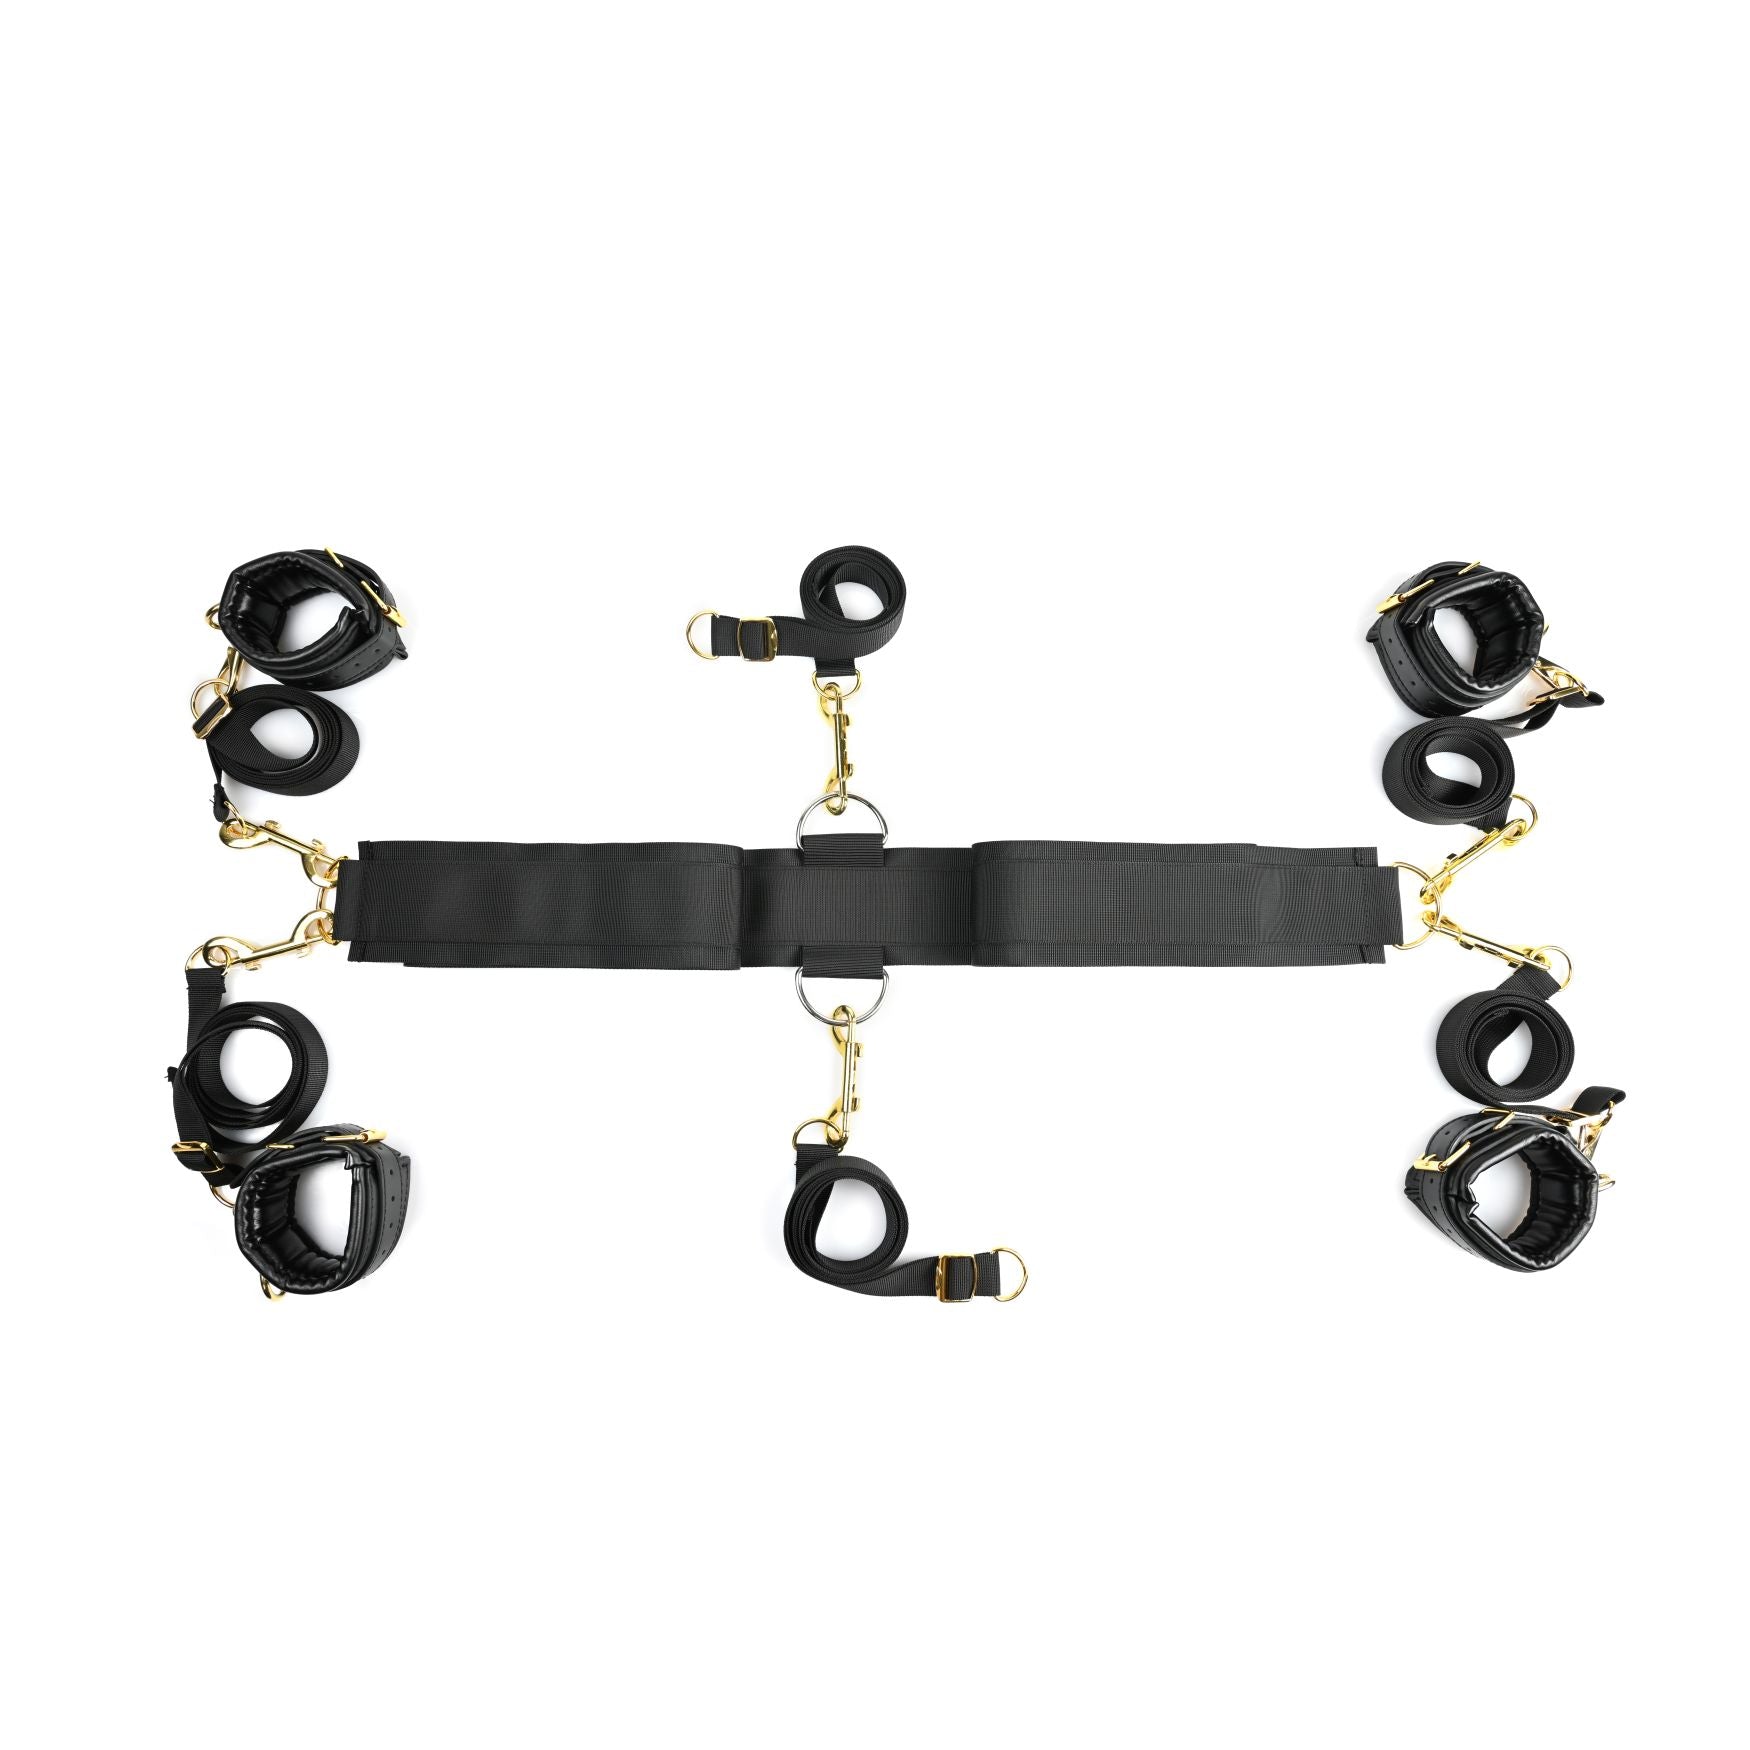 Sportsheets Under The Bed Restraints Kit Special Edition